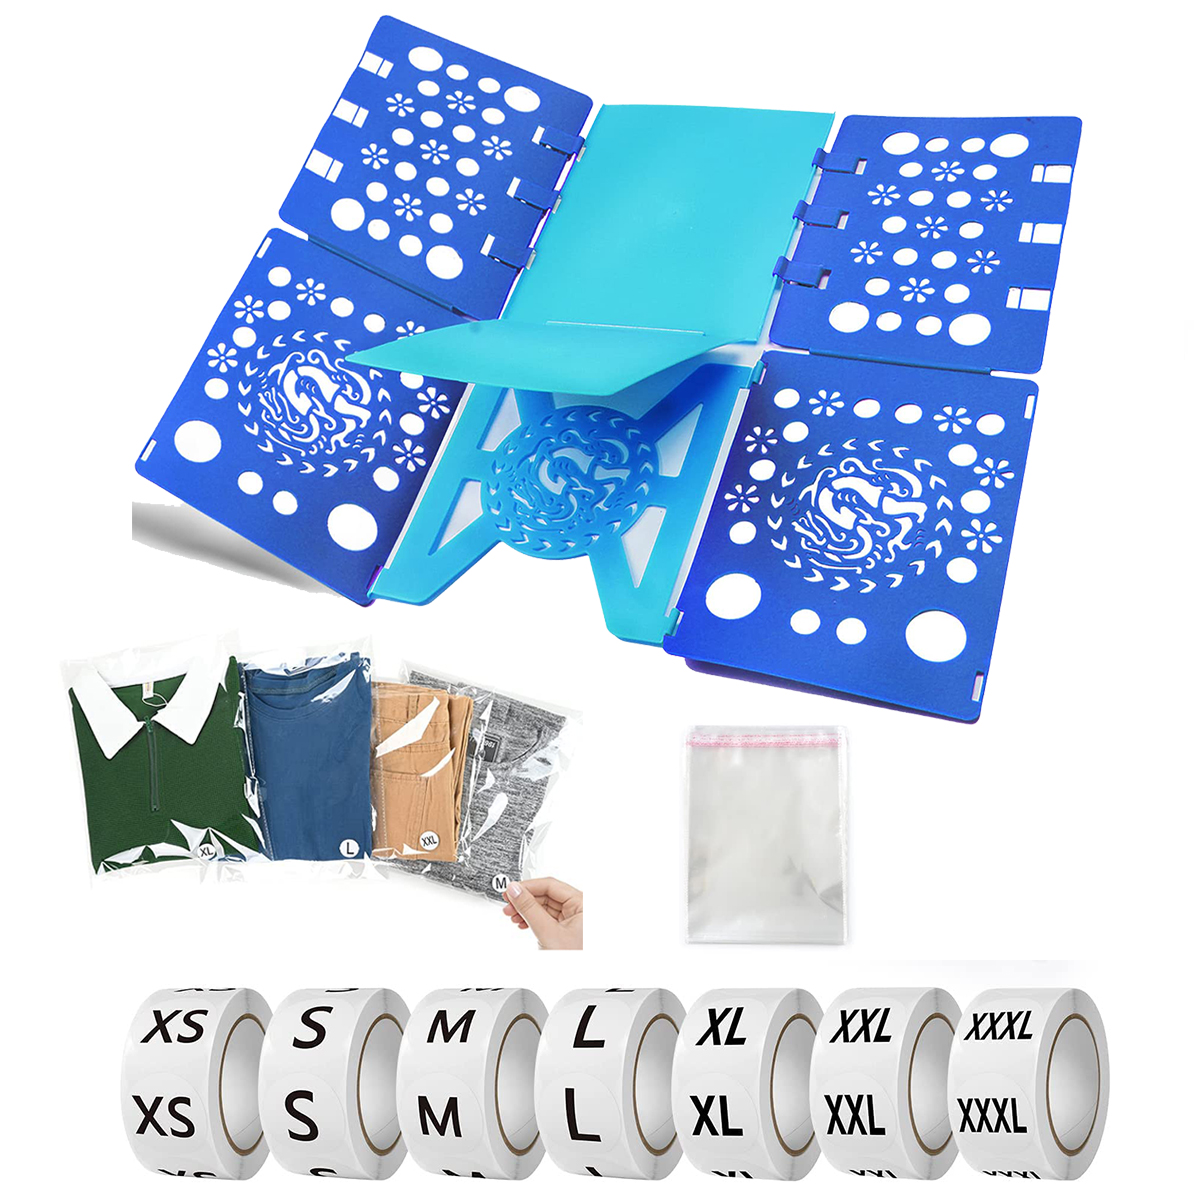 Immekey Shirt Folding Board T Shirts Clothes Folder, with Shirt Bags 100 Pcs10x13 Inches with Clothing Size Stickers Labels 7 Sizes 3500 Pcs, for